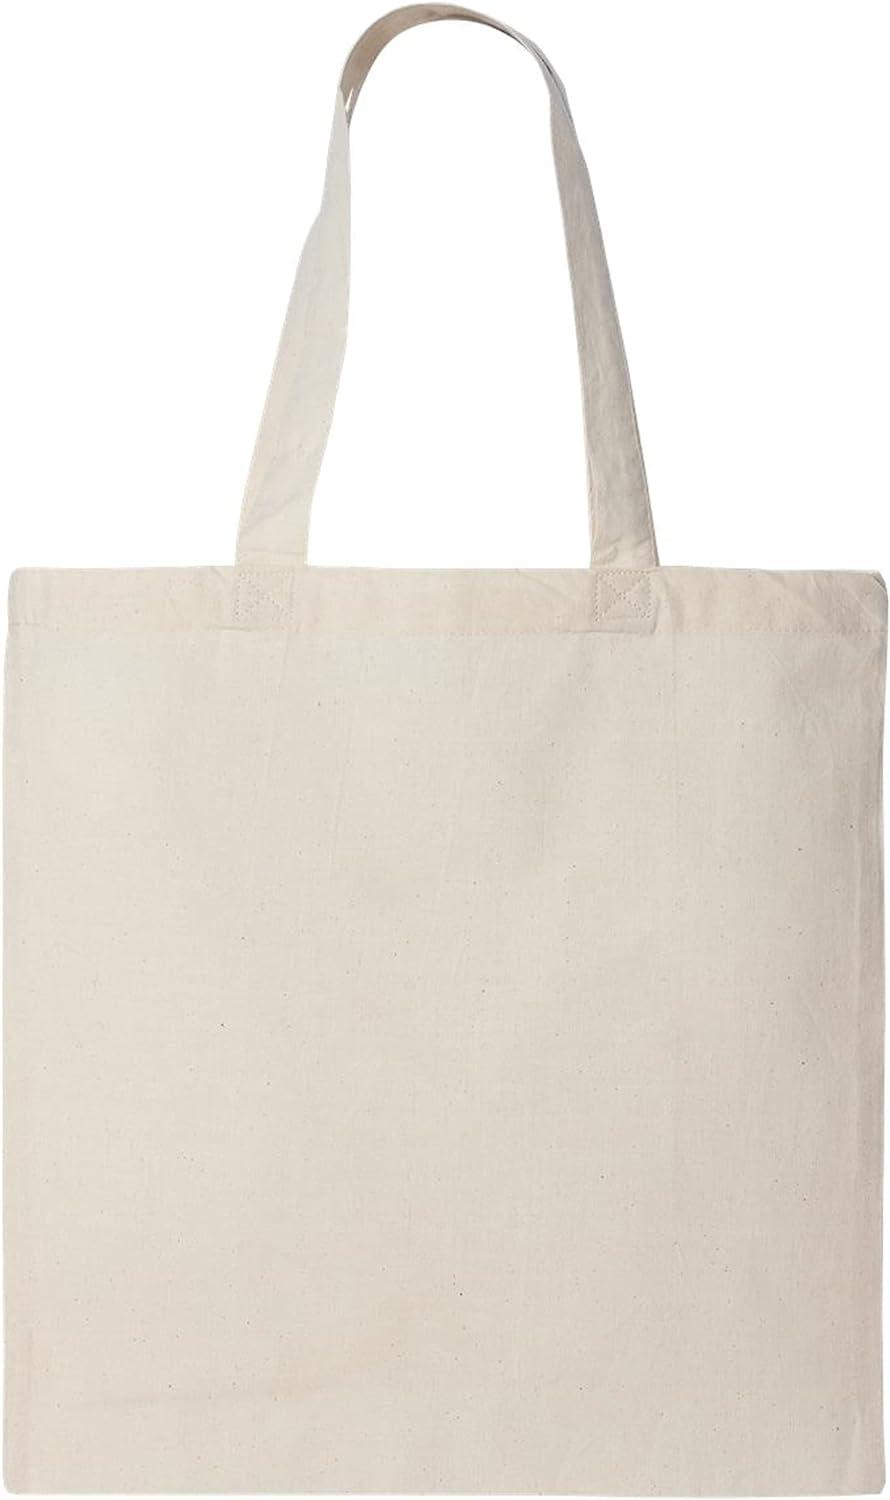 TBF Wholesale 12 Pack Cotton Canvas Natural Reusable Tote Bags in